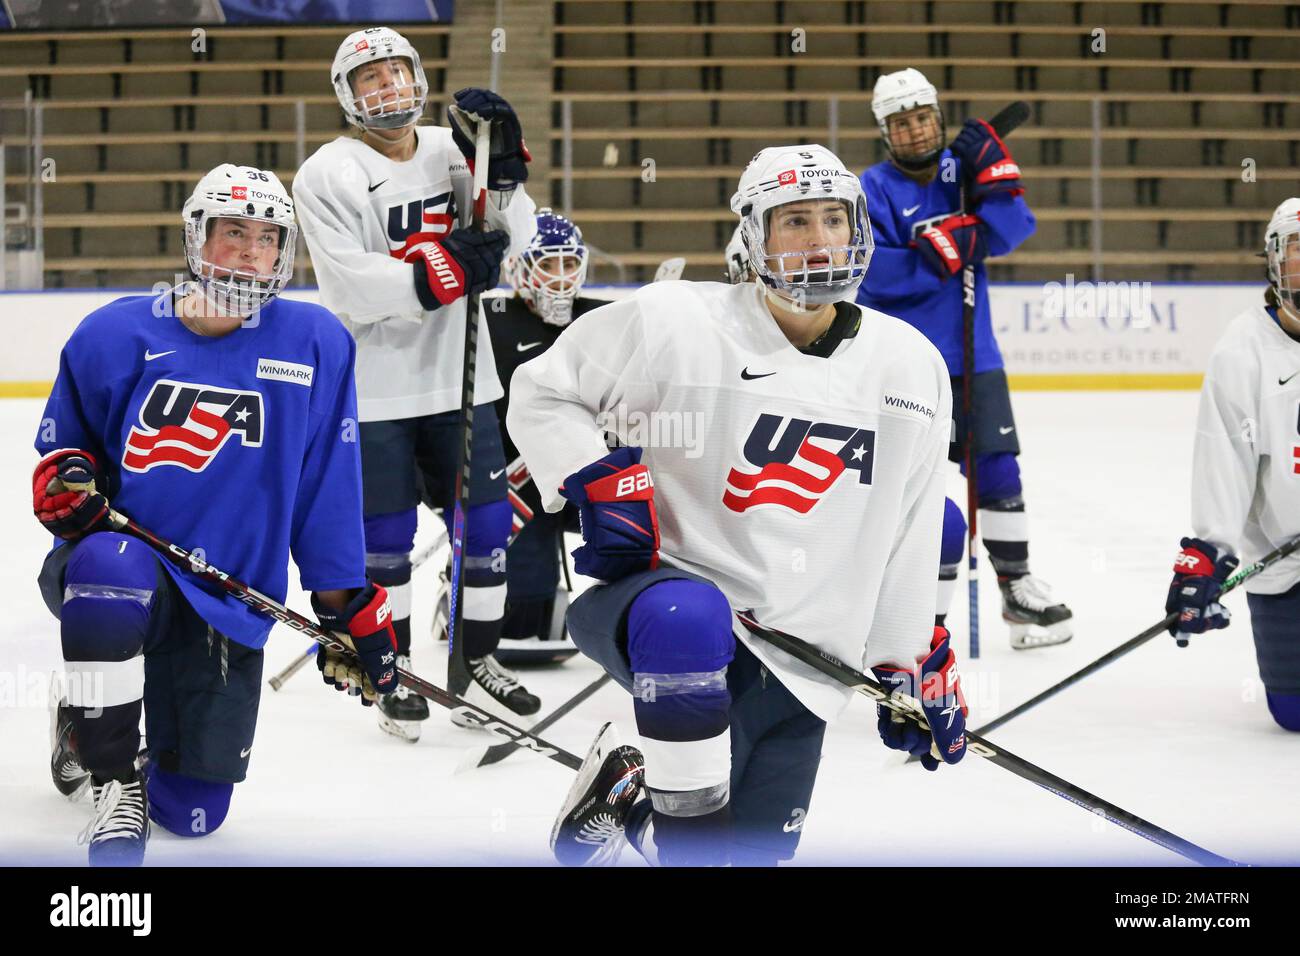 Members of the United States womens hockey team including Megan Keller (5) and Rory Guilday (36) listen in on a team meeting during practice at the Lecom Harborcenter rink in Buffalo, N.Y.,